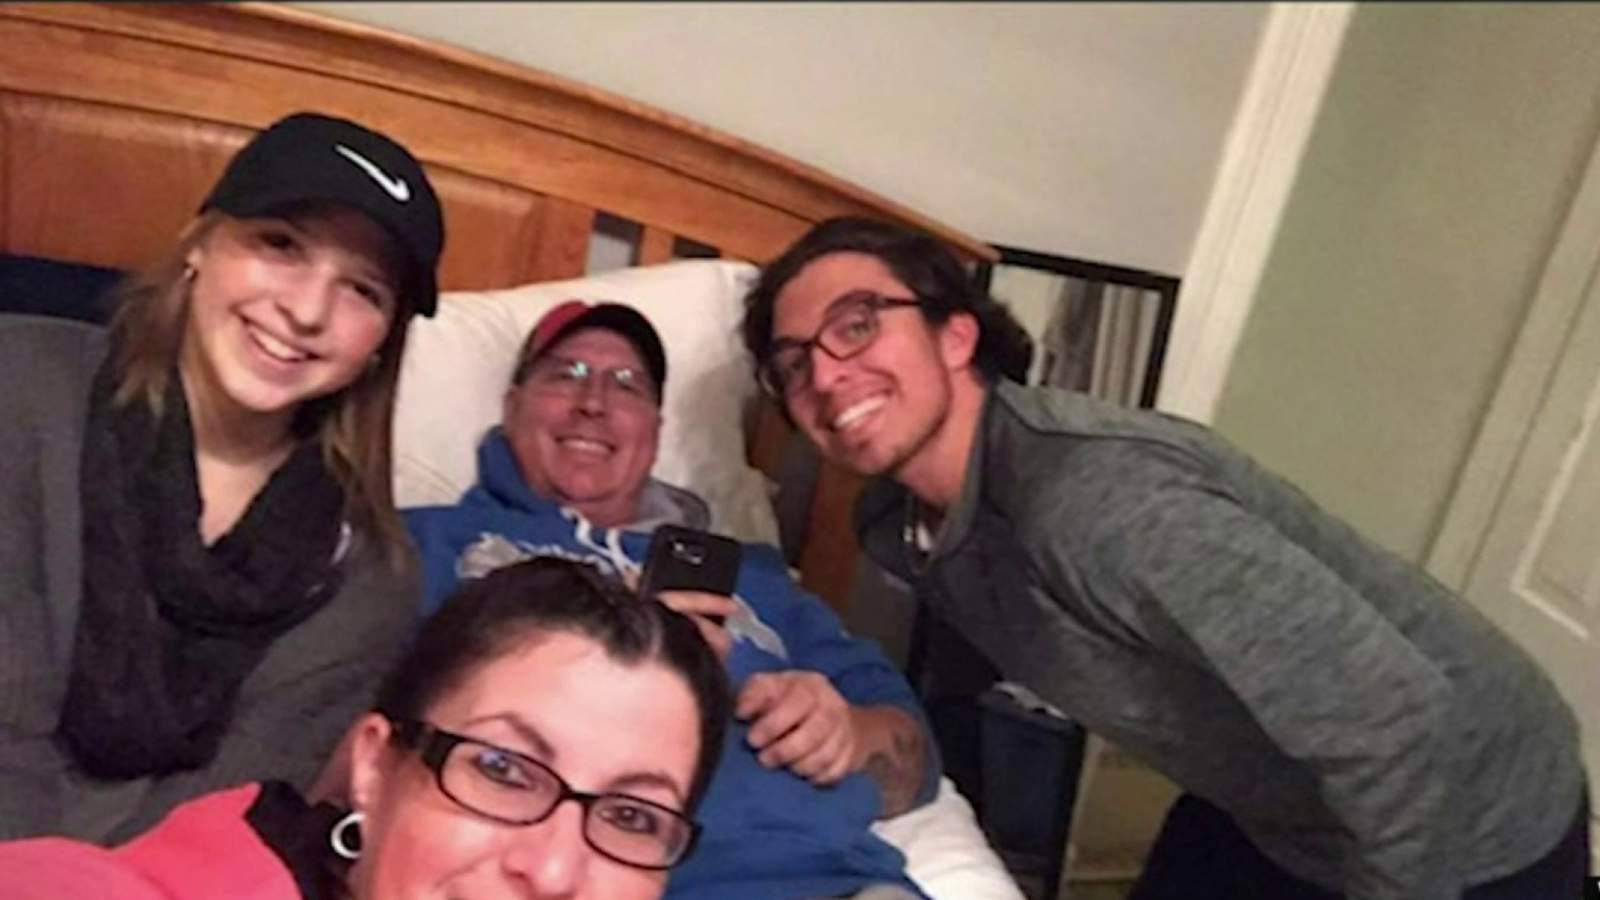 Man hospitalized for 44 days with COVID-19 shares story as Michigan case numbers rise again